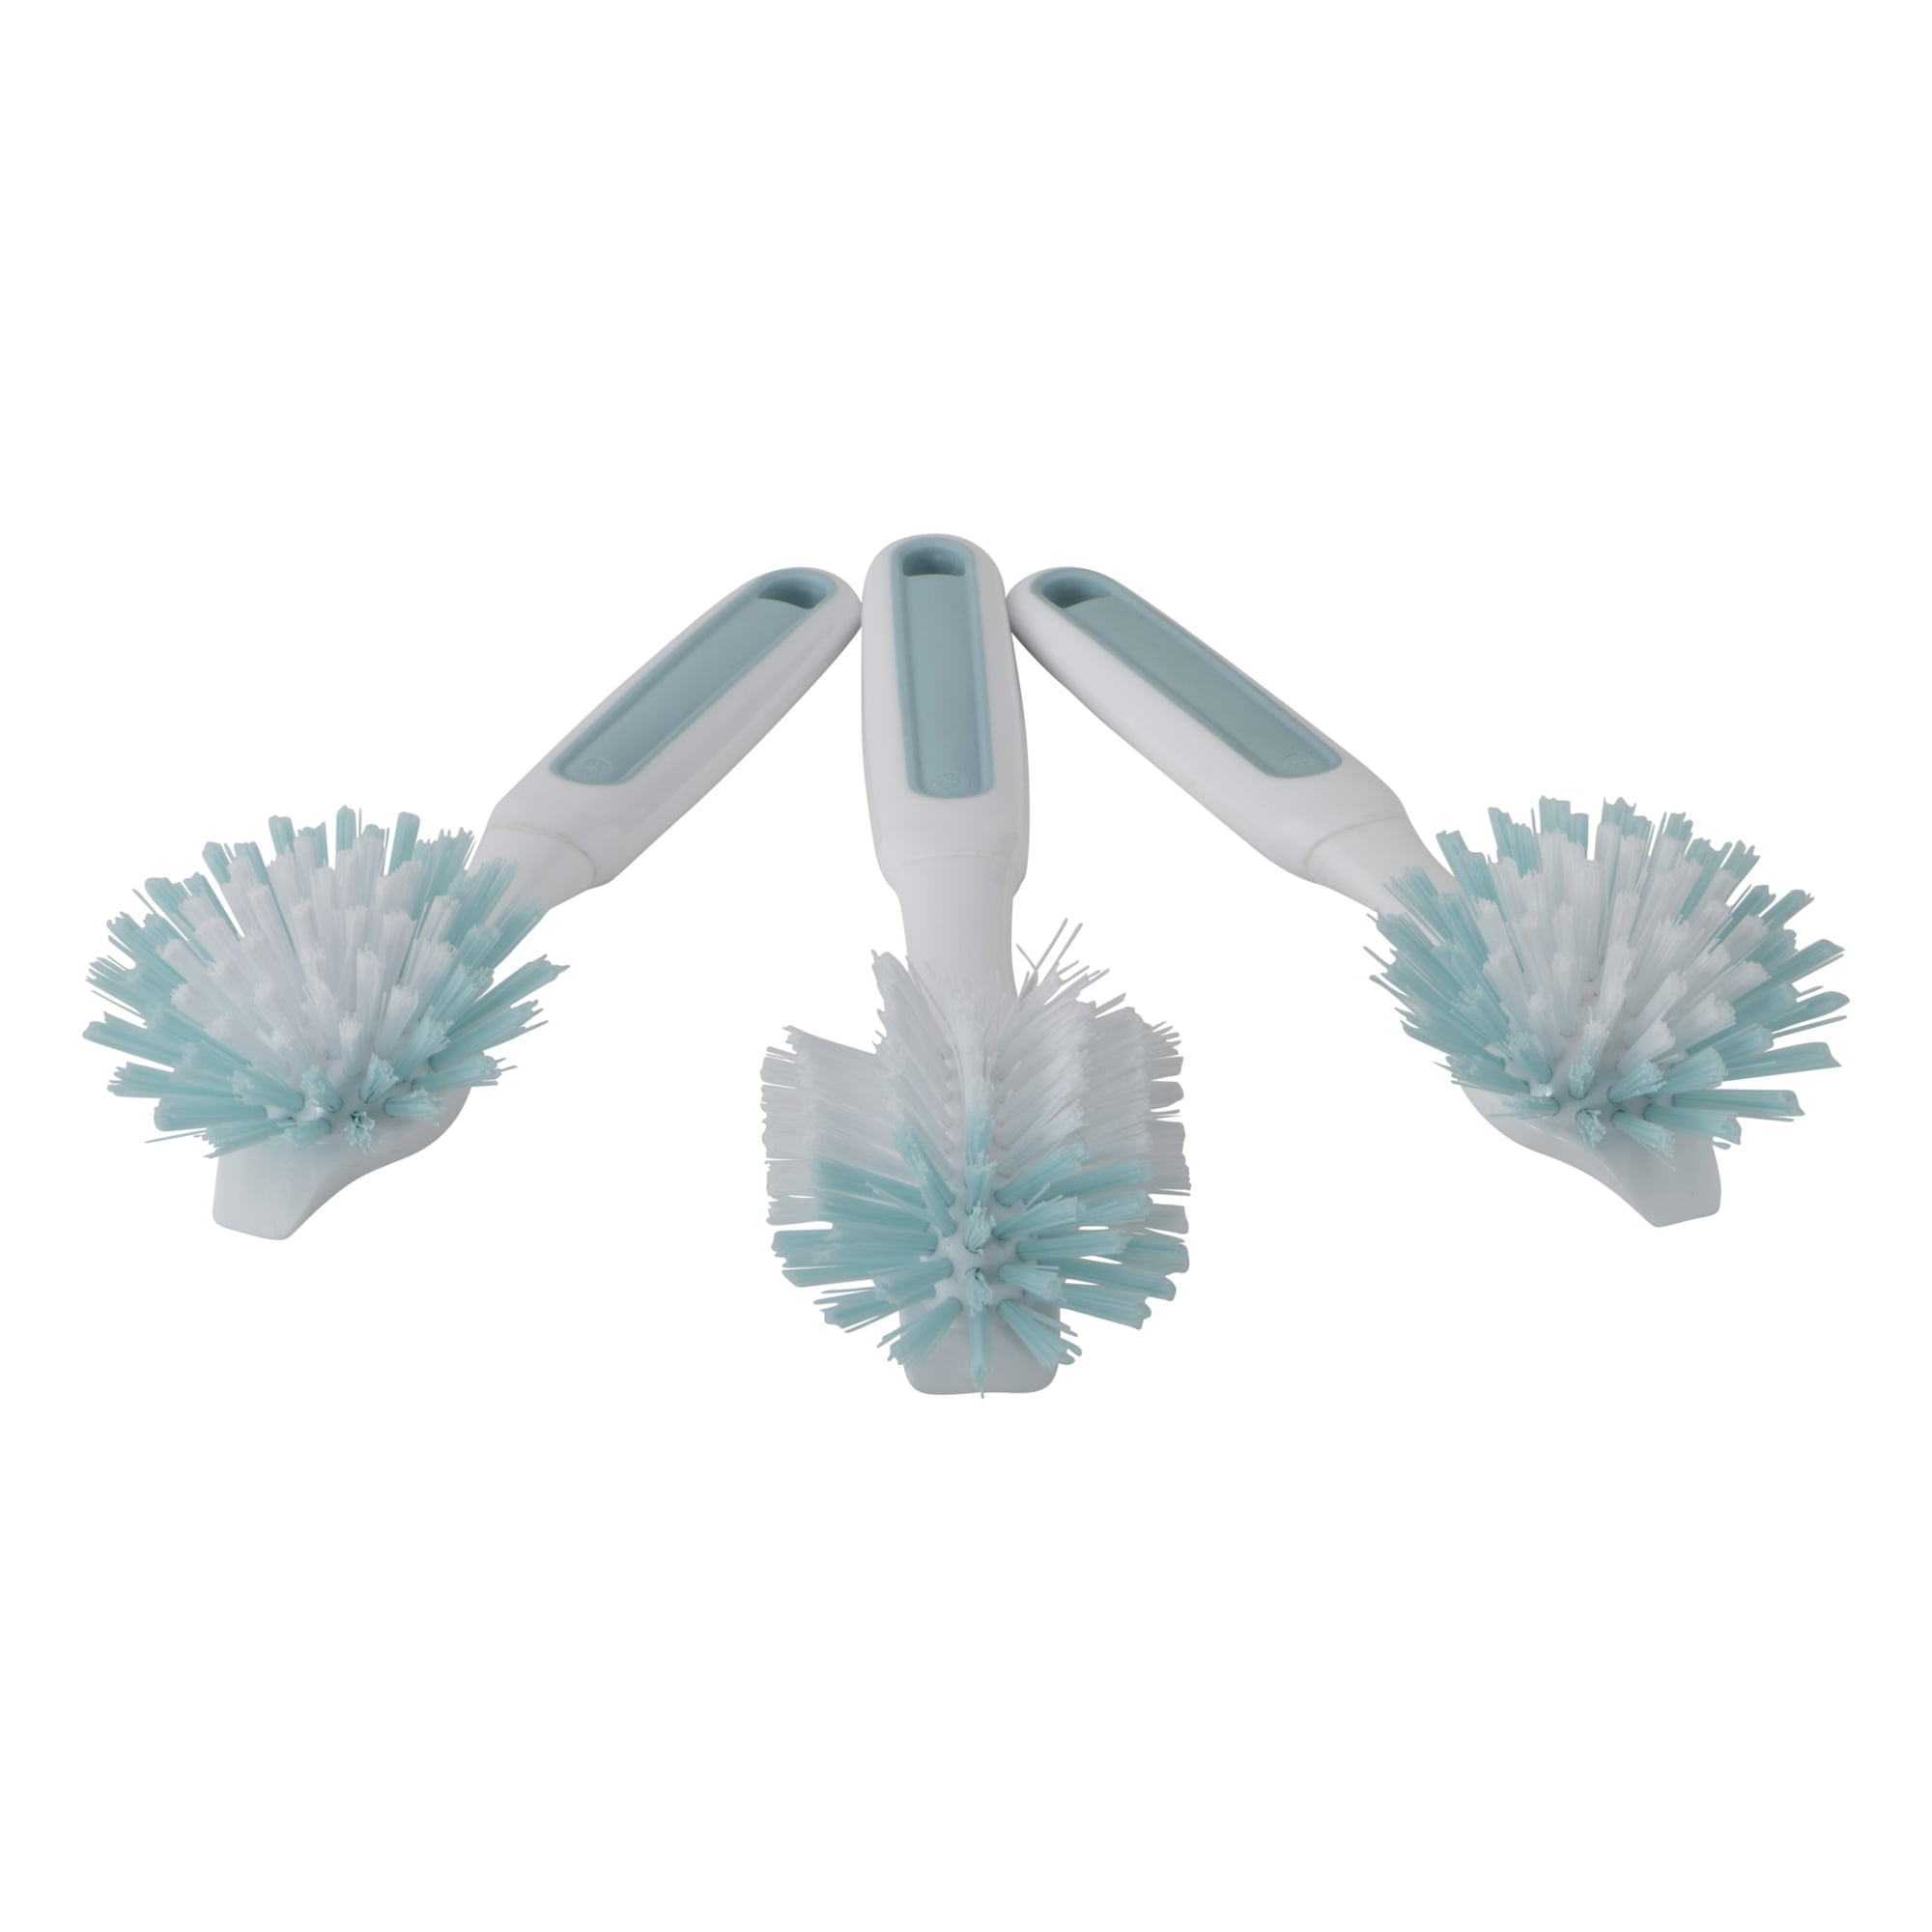 Greaticep - Set of 3: Kitchen Stove Cleaning Brush